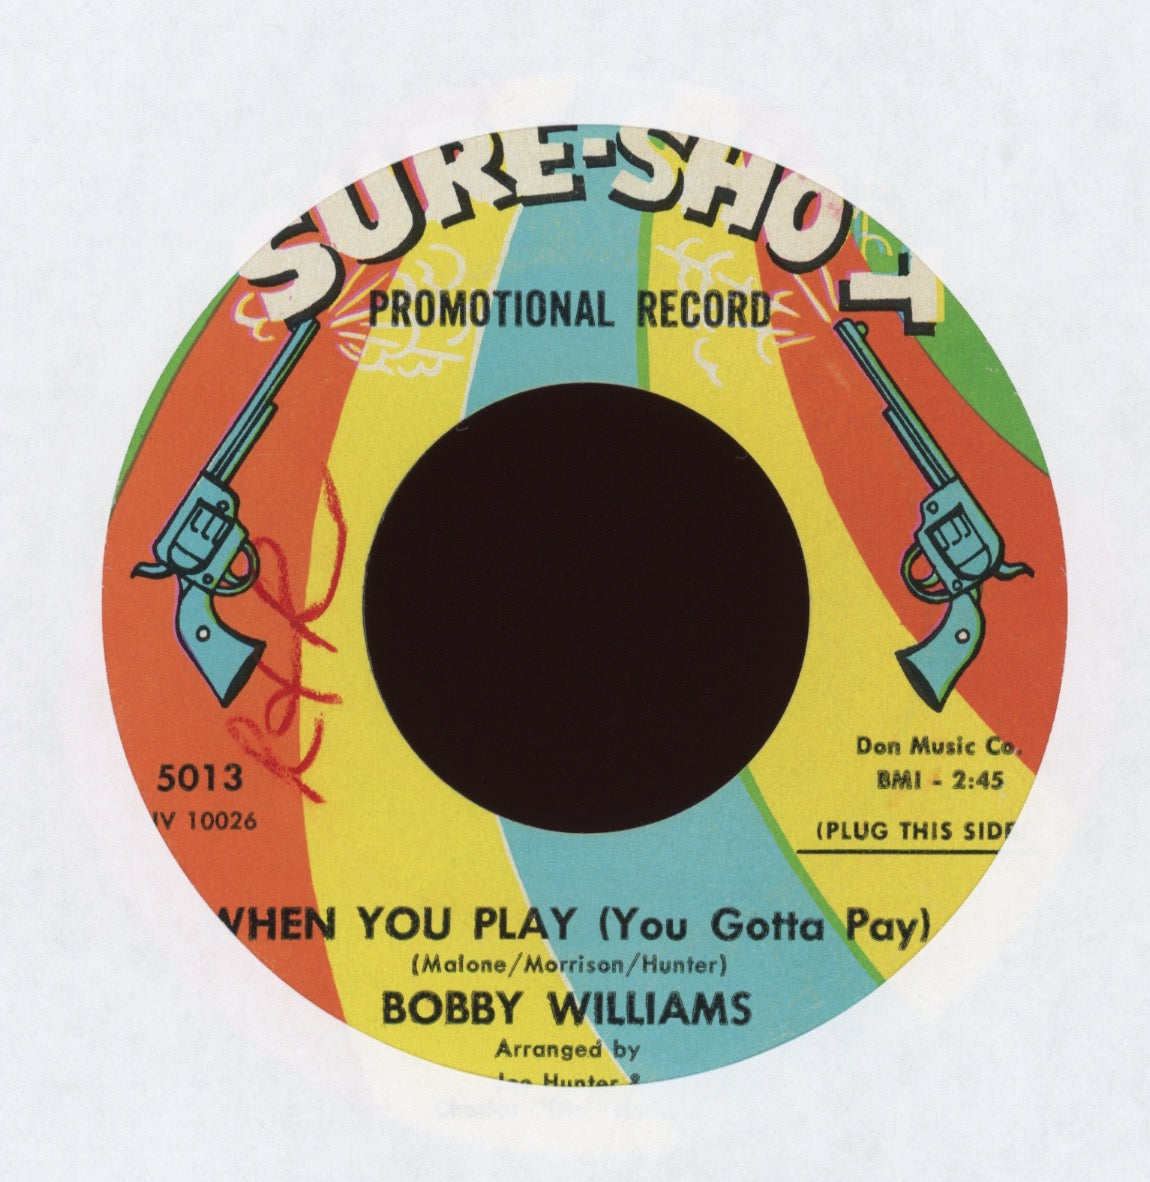 Bobby Williams - When You Play (You Gotta Pay) on Sure Shot Promo Northern Soul 45